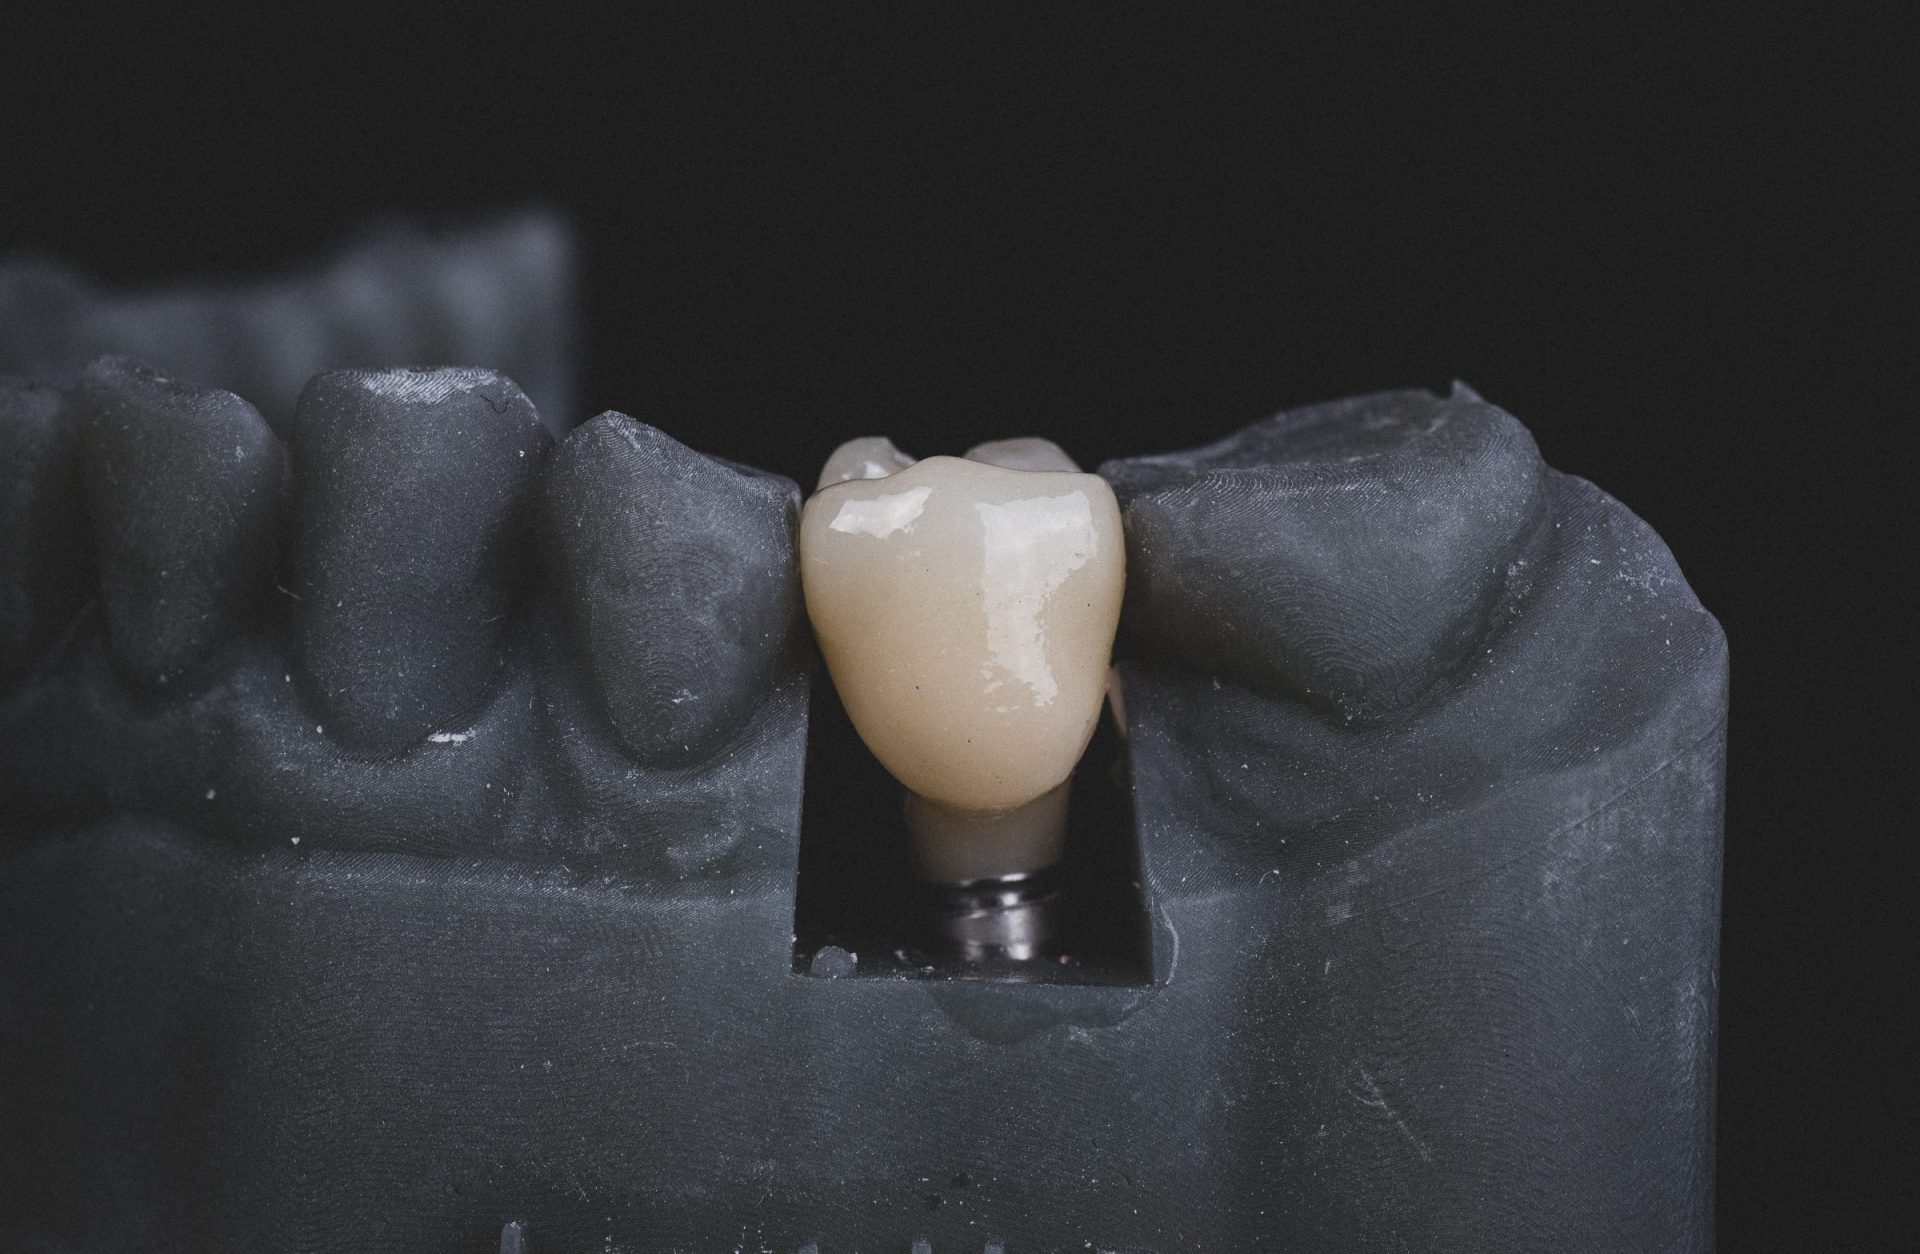 dental implant in black and white